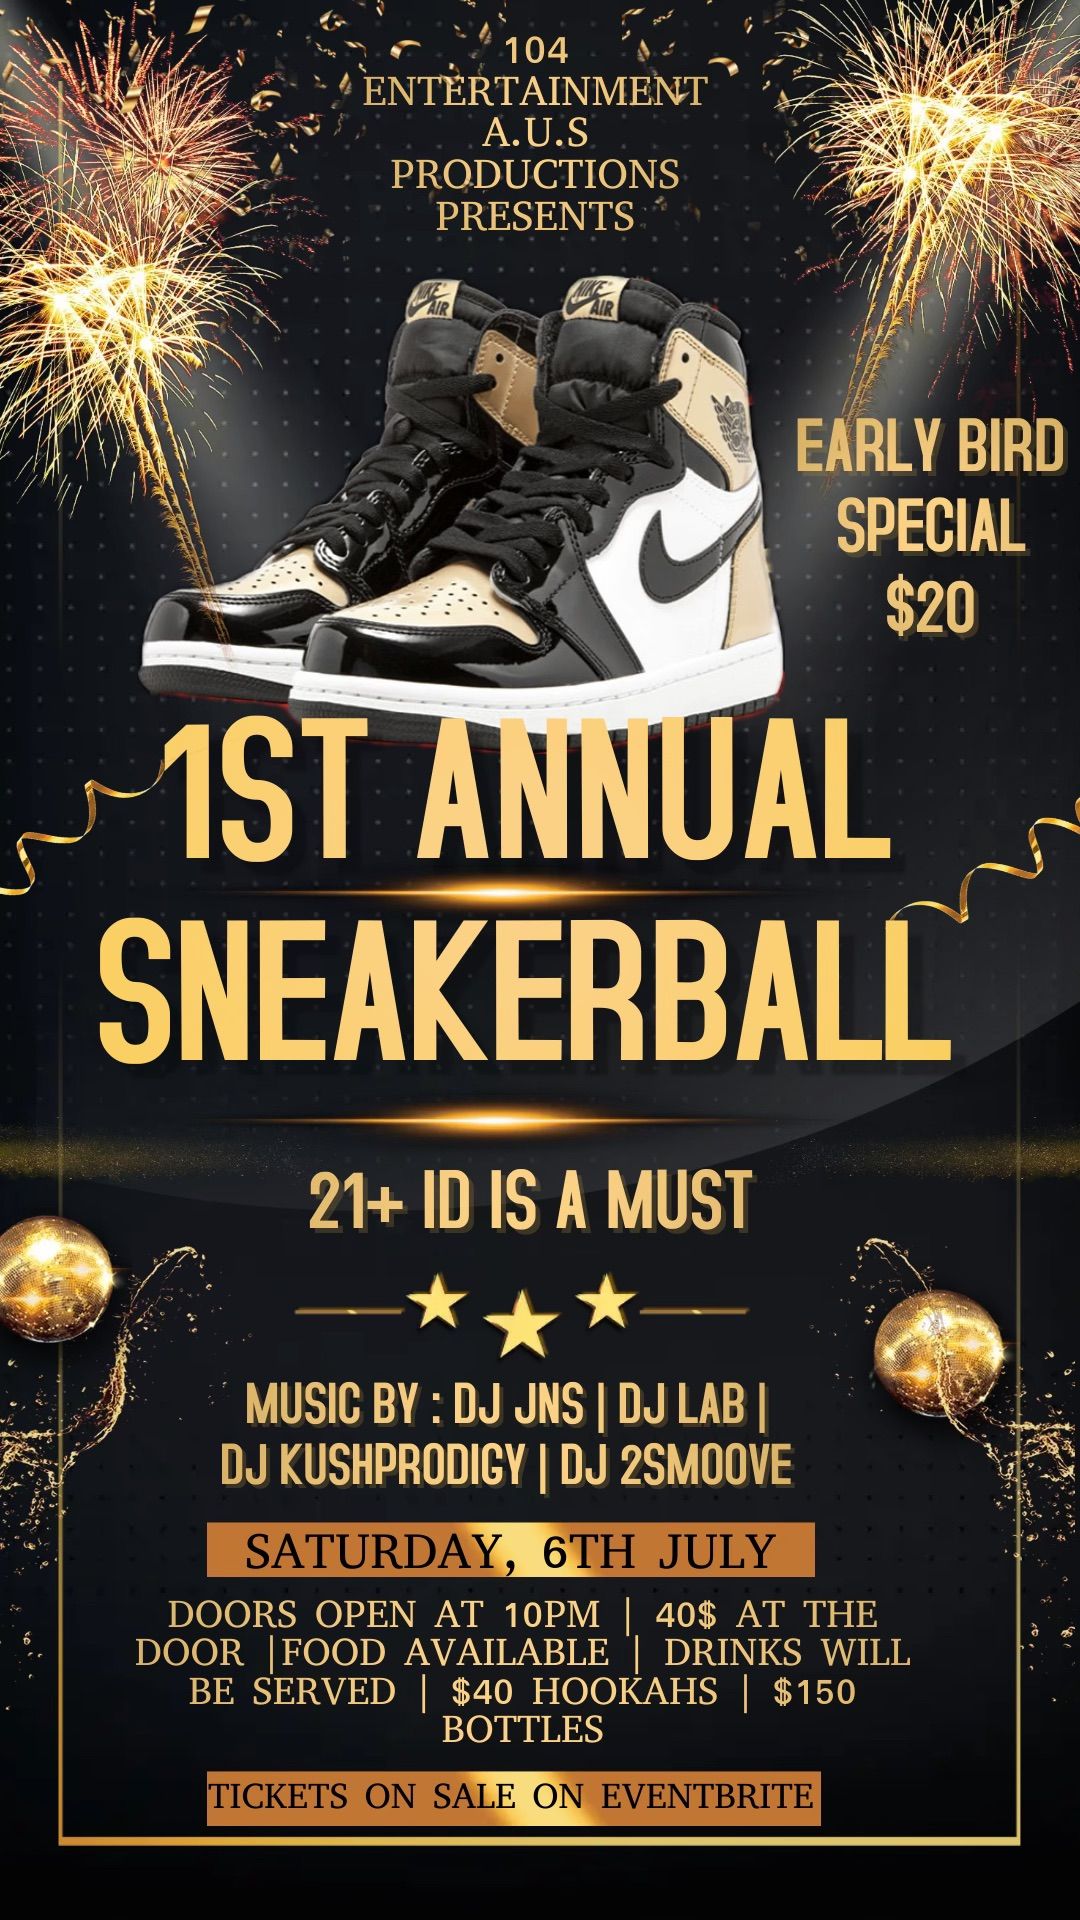 1st Annual Sneaker Ball red carpet event 